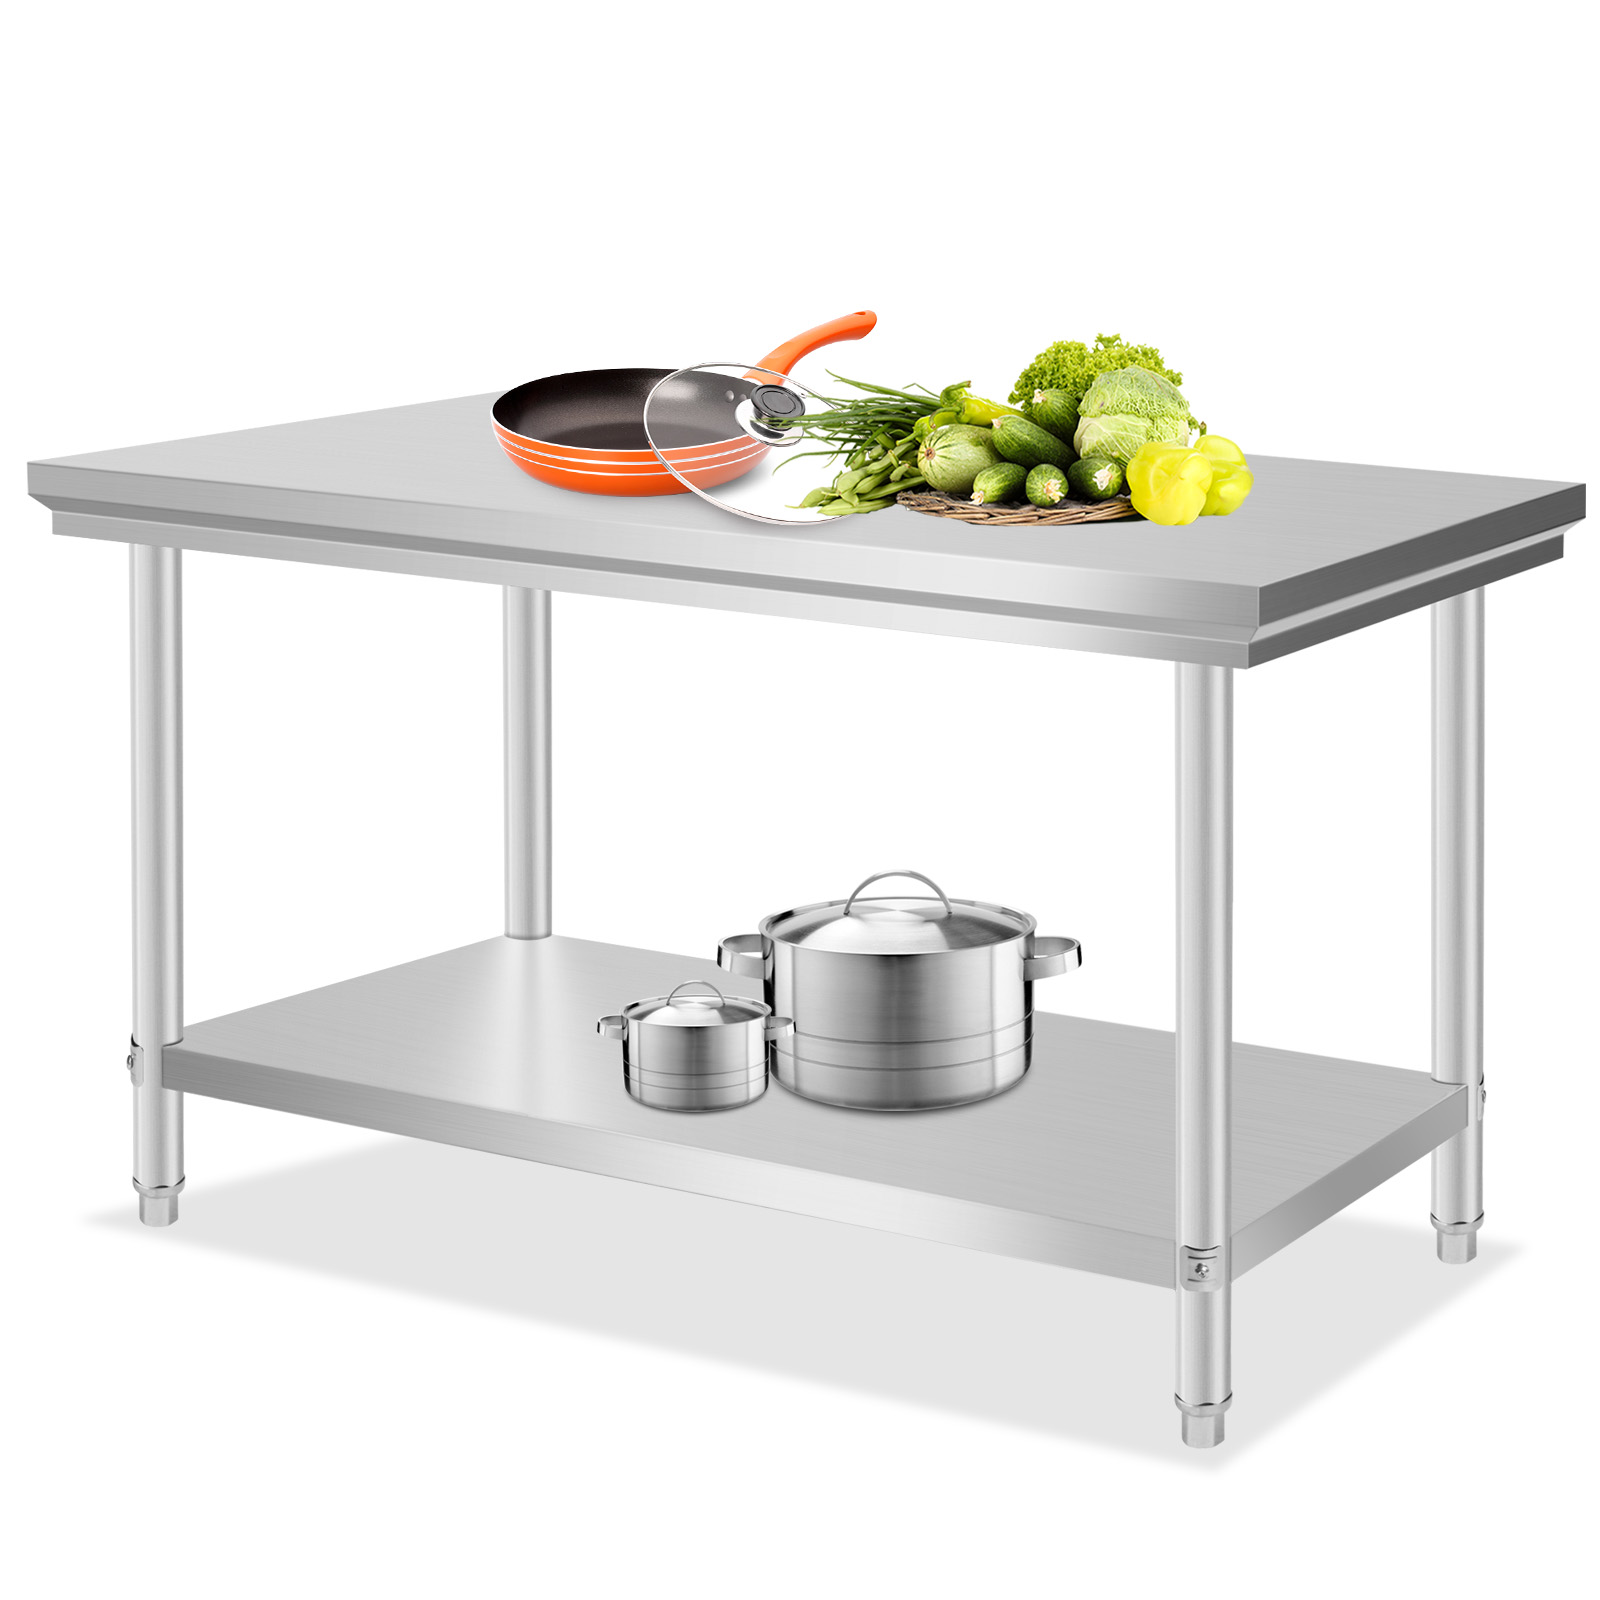 Vevor Stainless Steel Commercial Catering Table Work Bench Kitchen 2 ...